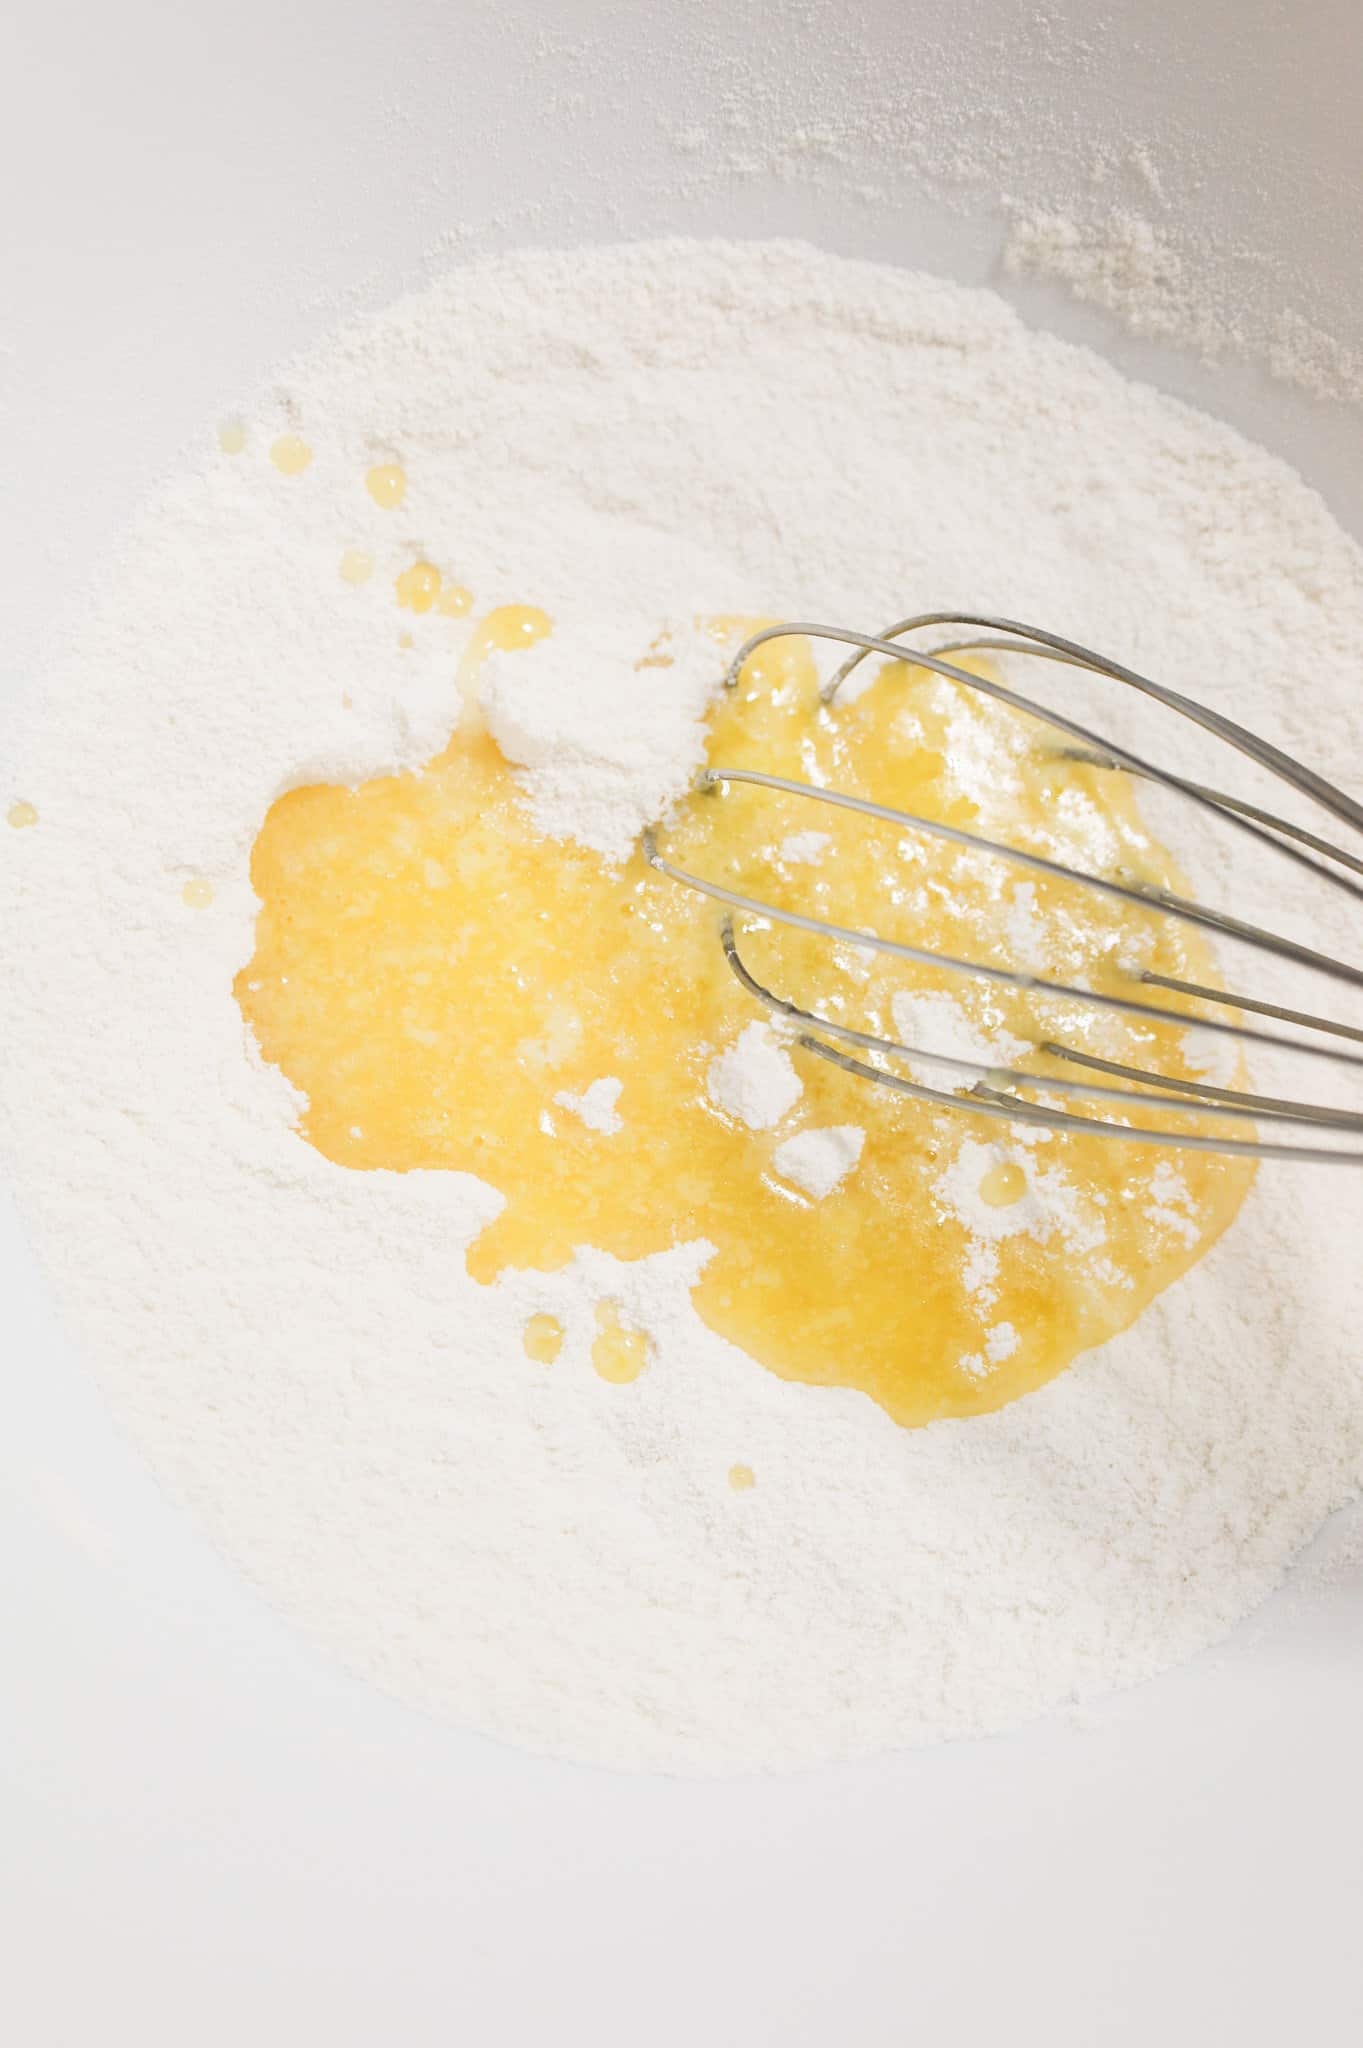 melted butter added to dry ingredients in a mixing bowl